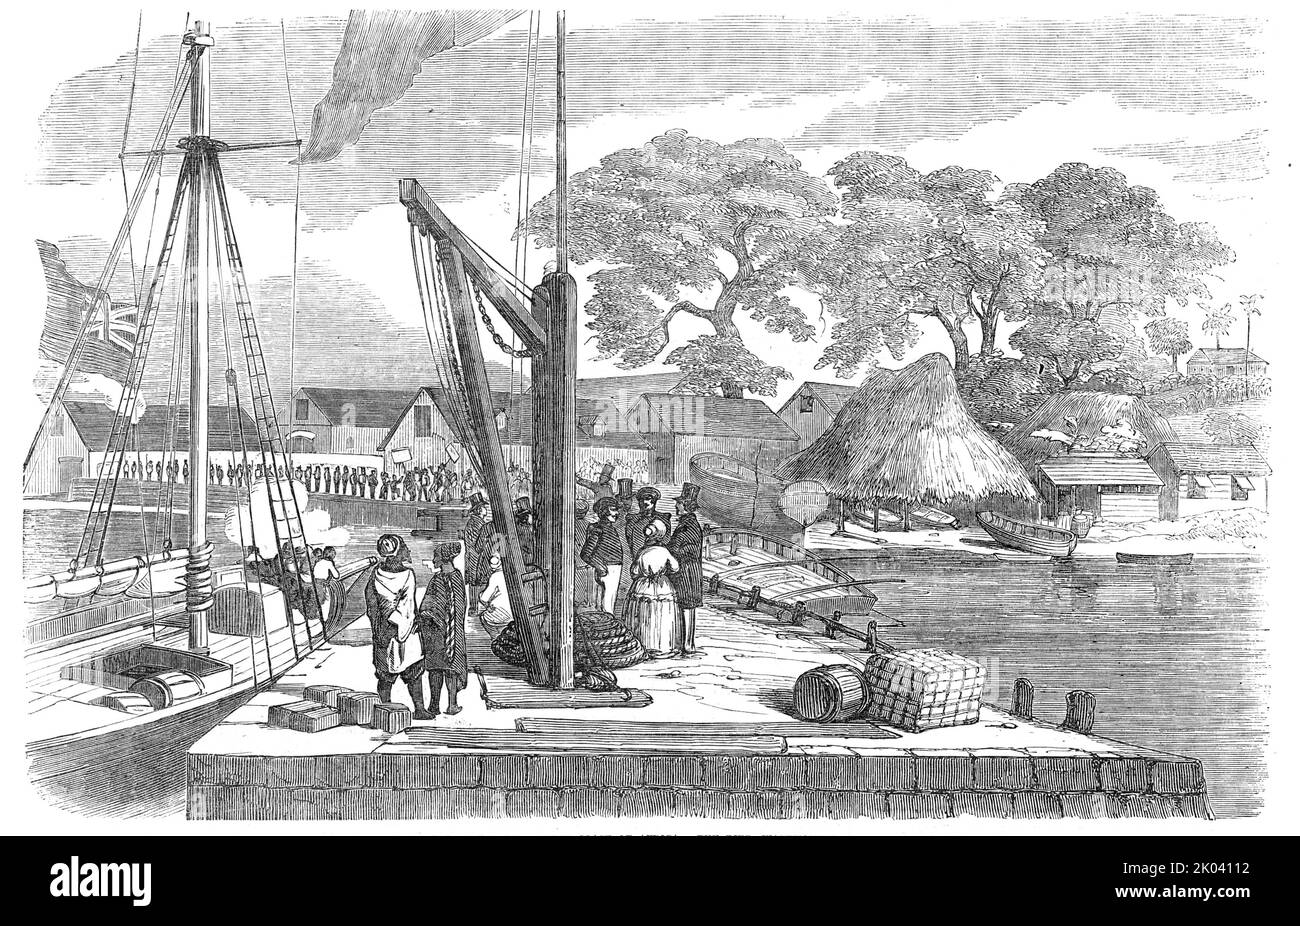 Matacong, on the West Coast of Africa - the Pier, Warehouses, etc., 1854. Sketch accompanying an article on '...the progress in &quot;legitimate trade&quot; [at the island of Matakong off the coast of Guinea], and the great benefits which it cannot fail to confer upon the African race...Matacong (a corruption of Mata-can)...lies to the westward of the mouth of the Fouricariah river...Fish abound...and attract...fishermen from Sierra Leone...The silk cotton tree (Bombax Ceiba) grows here in great luxuriance...Here the African shows that secular and religious education has not been wholly thrown Stock Photo